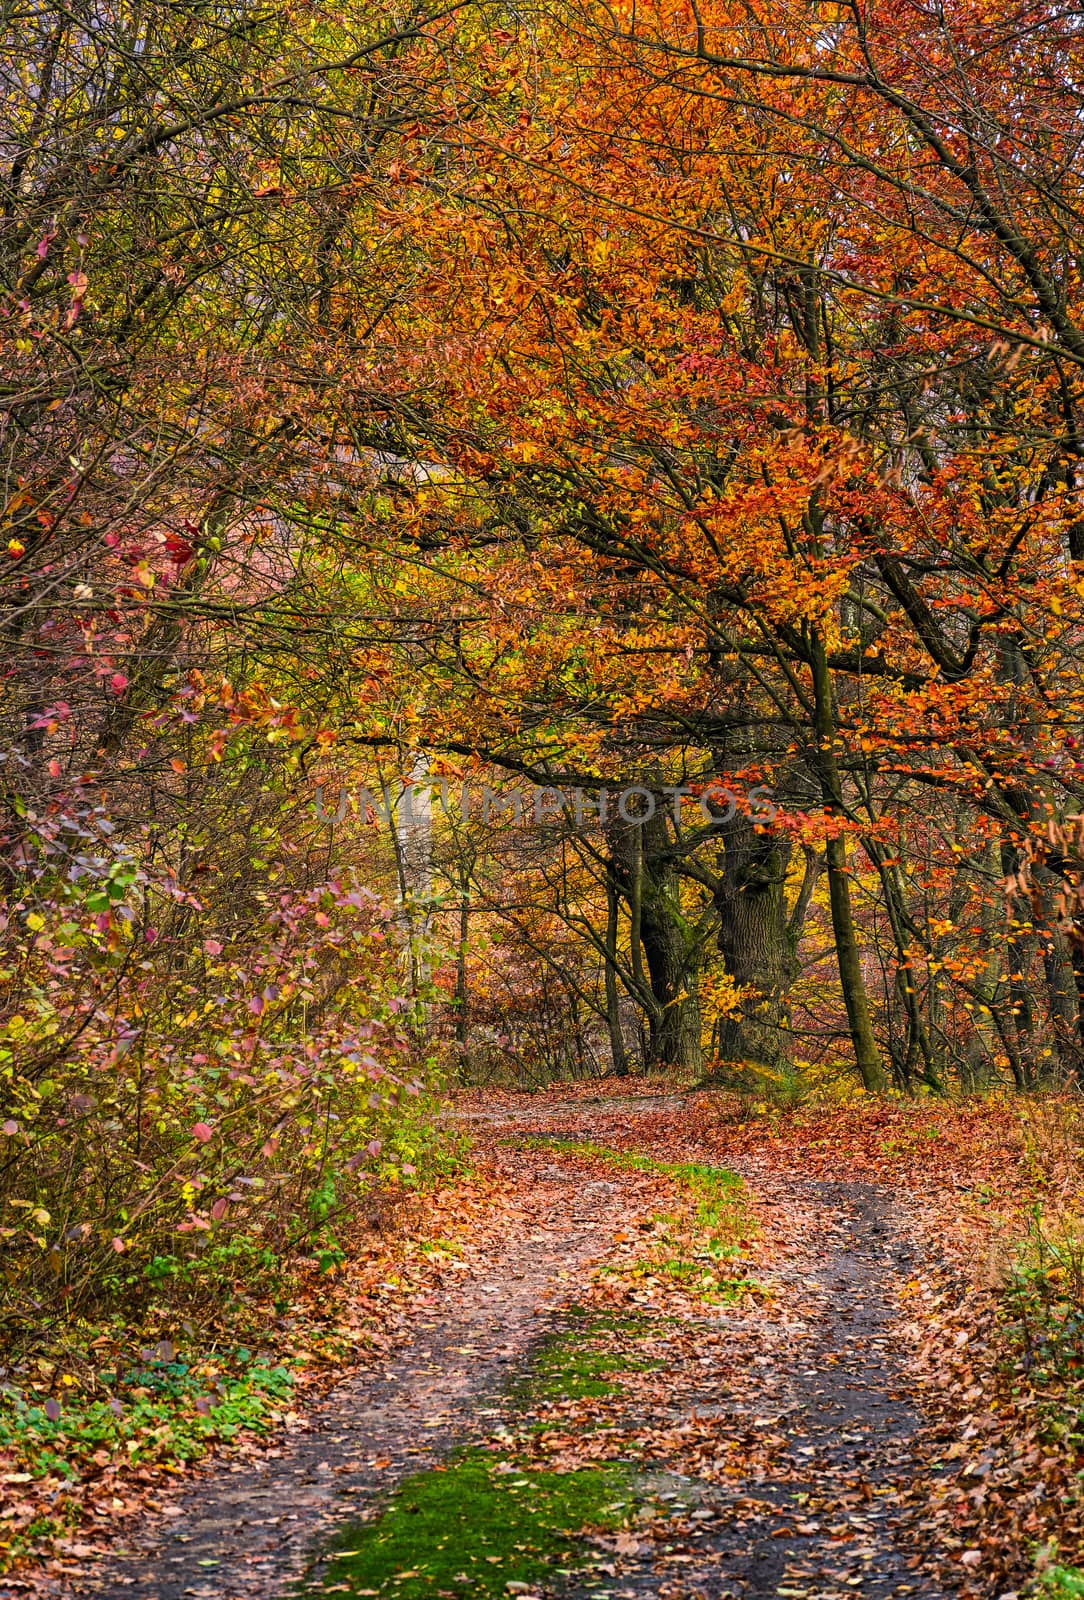 dirt road in forest with reddish foliage by Pellinni